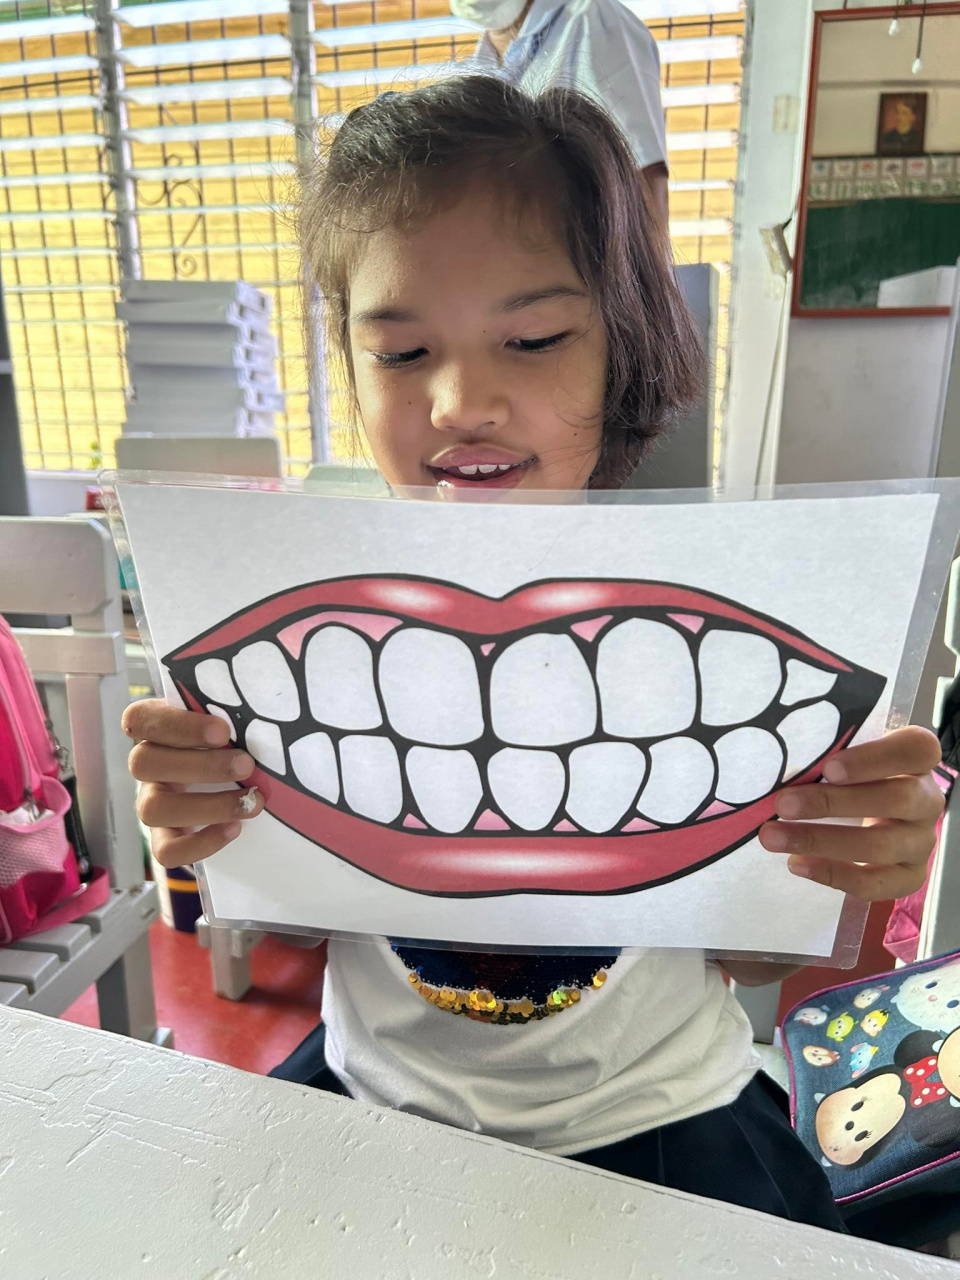 trying out this DIY brushing of teeth with my learners with special needs